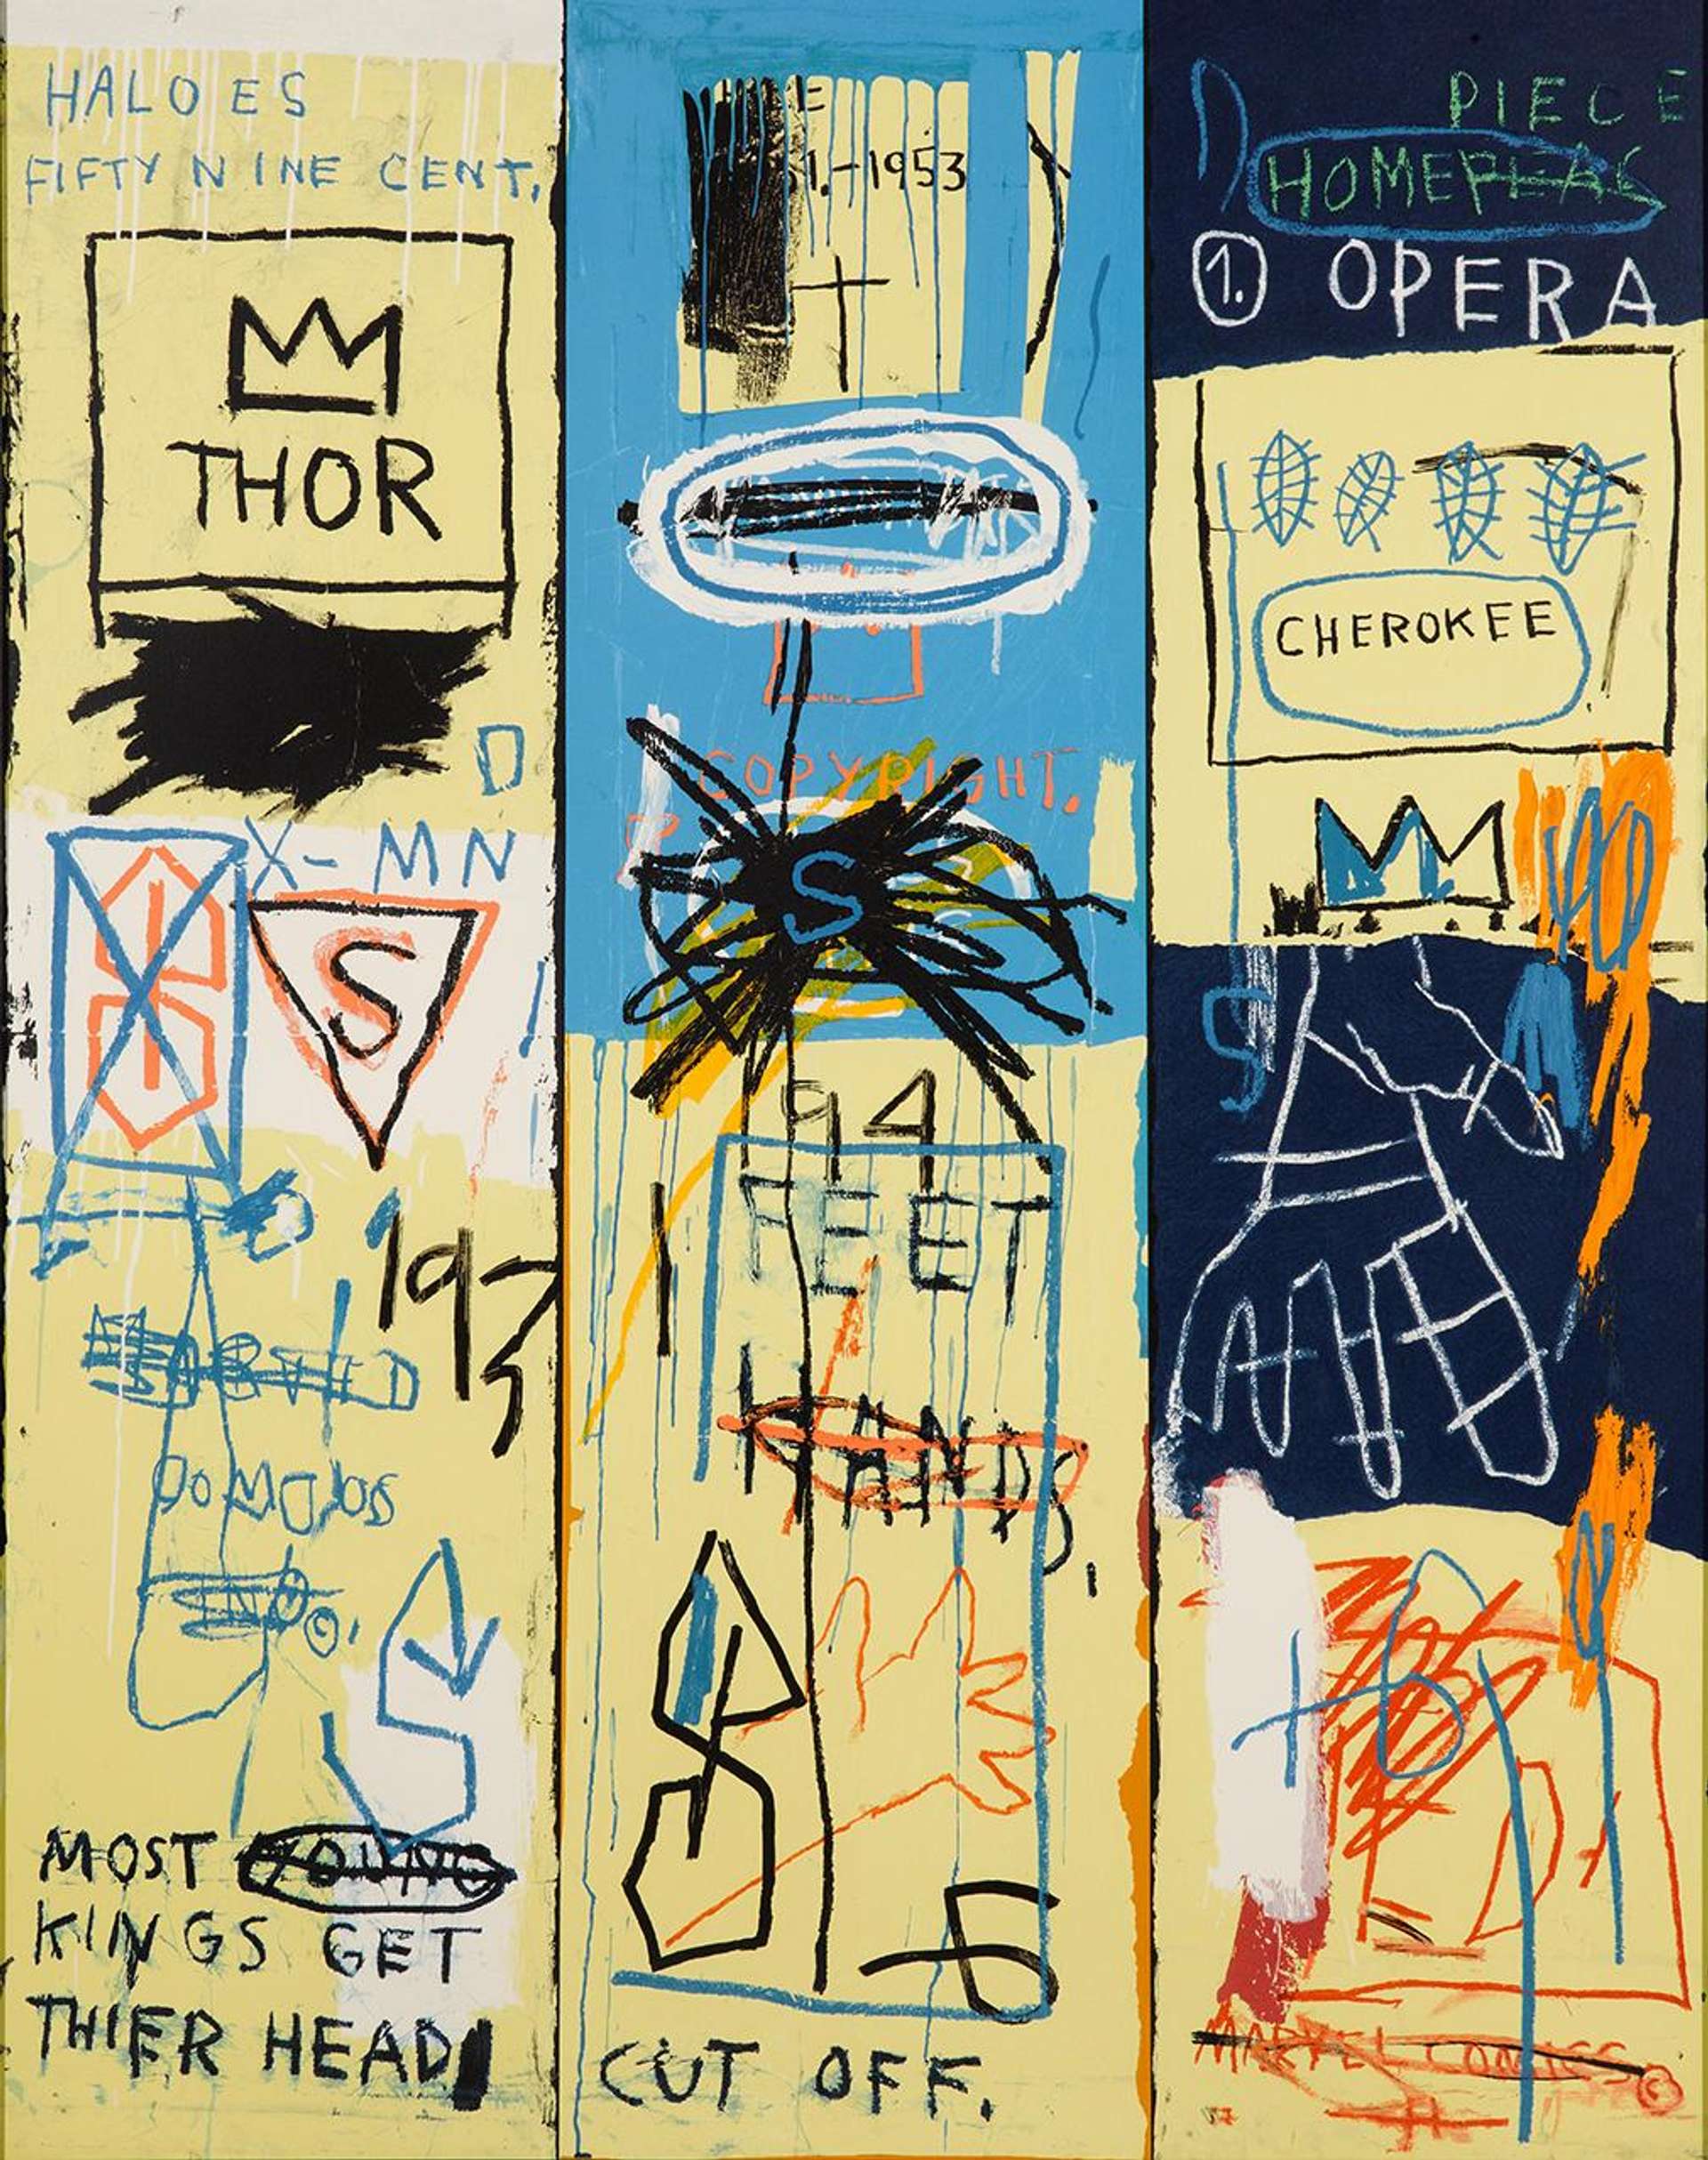 A screen print in colours on wove paper by Jean-Michel Basquiat depicting different symbols and written works against a yellow and blue background.